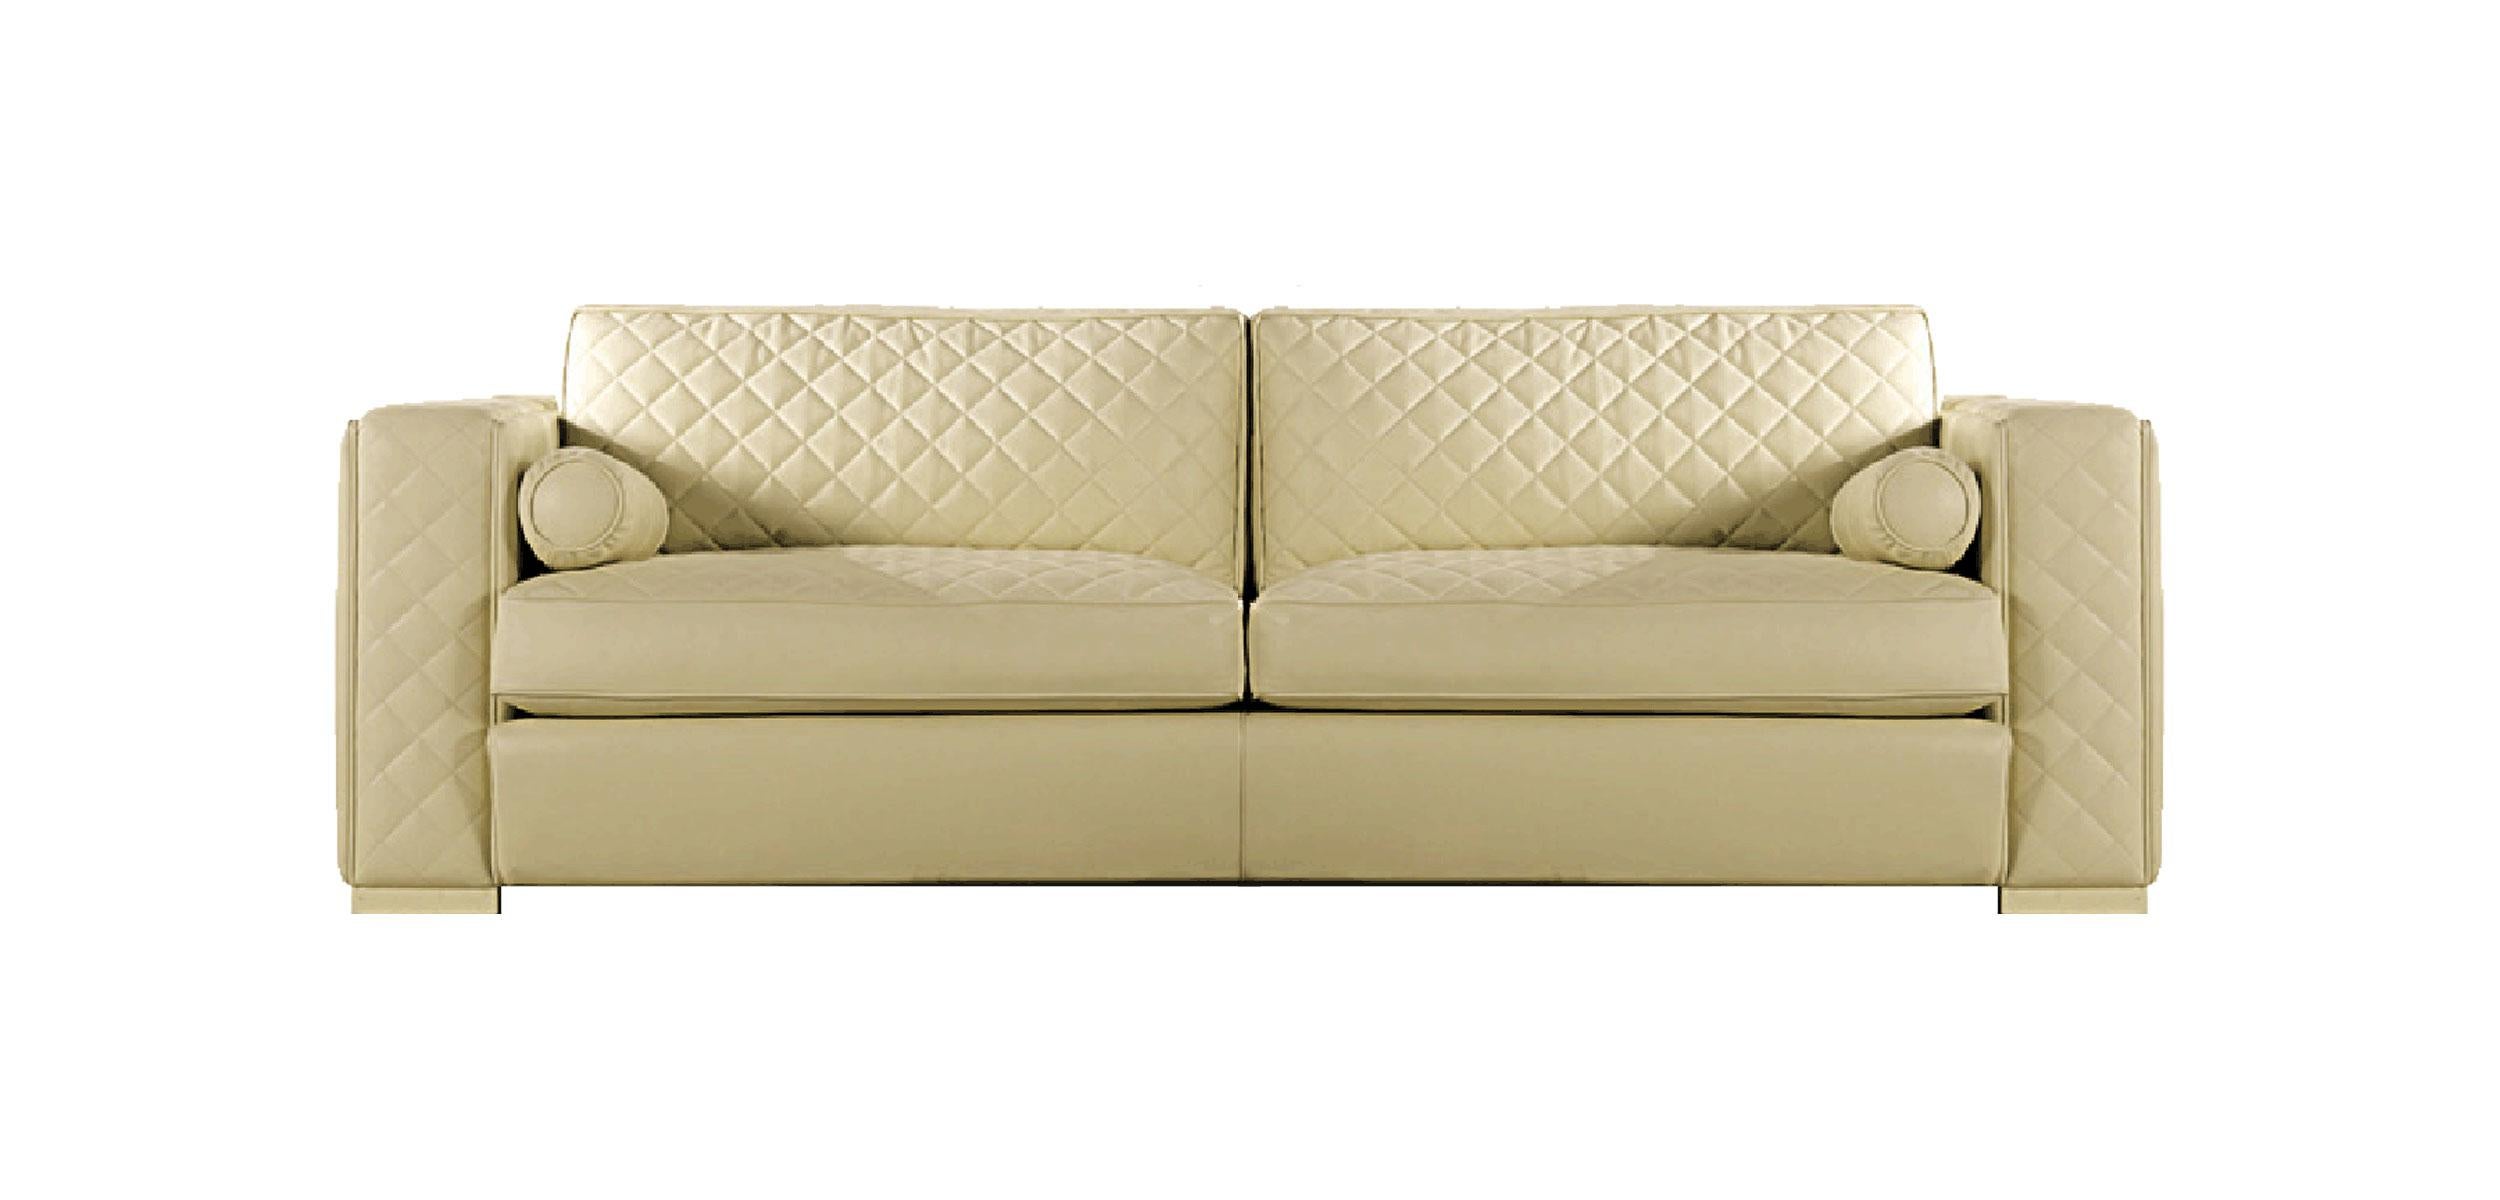 Mediterraneo is a sleek and exclusive three-seater sofa in leather, with finely embroidered seat cushions, backrest cushions and details. Lacquered feet to match the upholstery. Standard components of absolute quality are the solid wood frame and